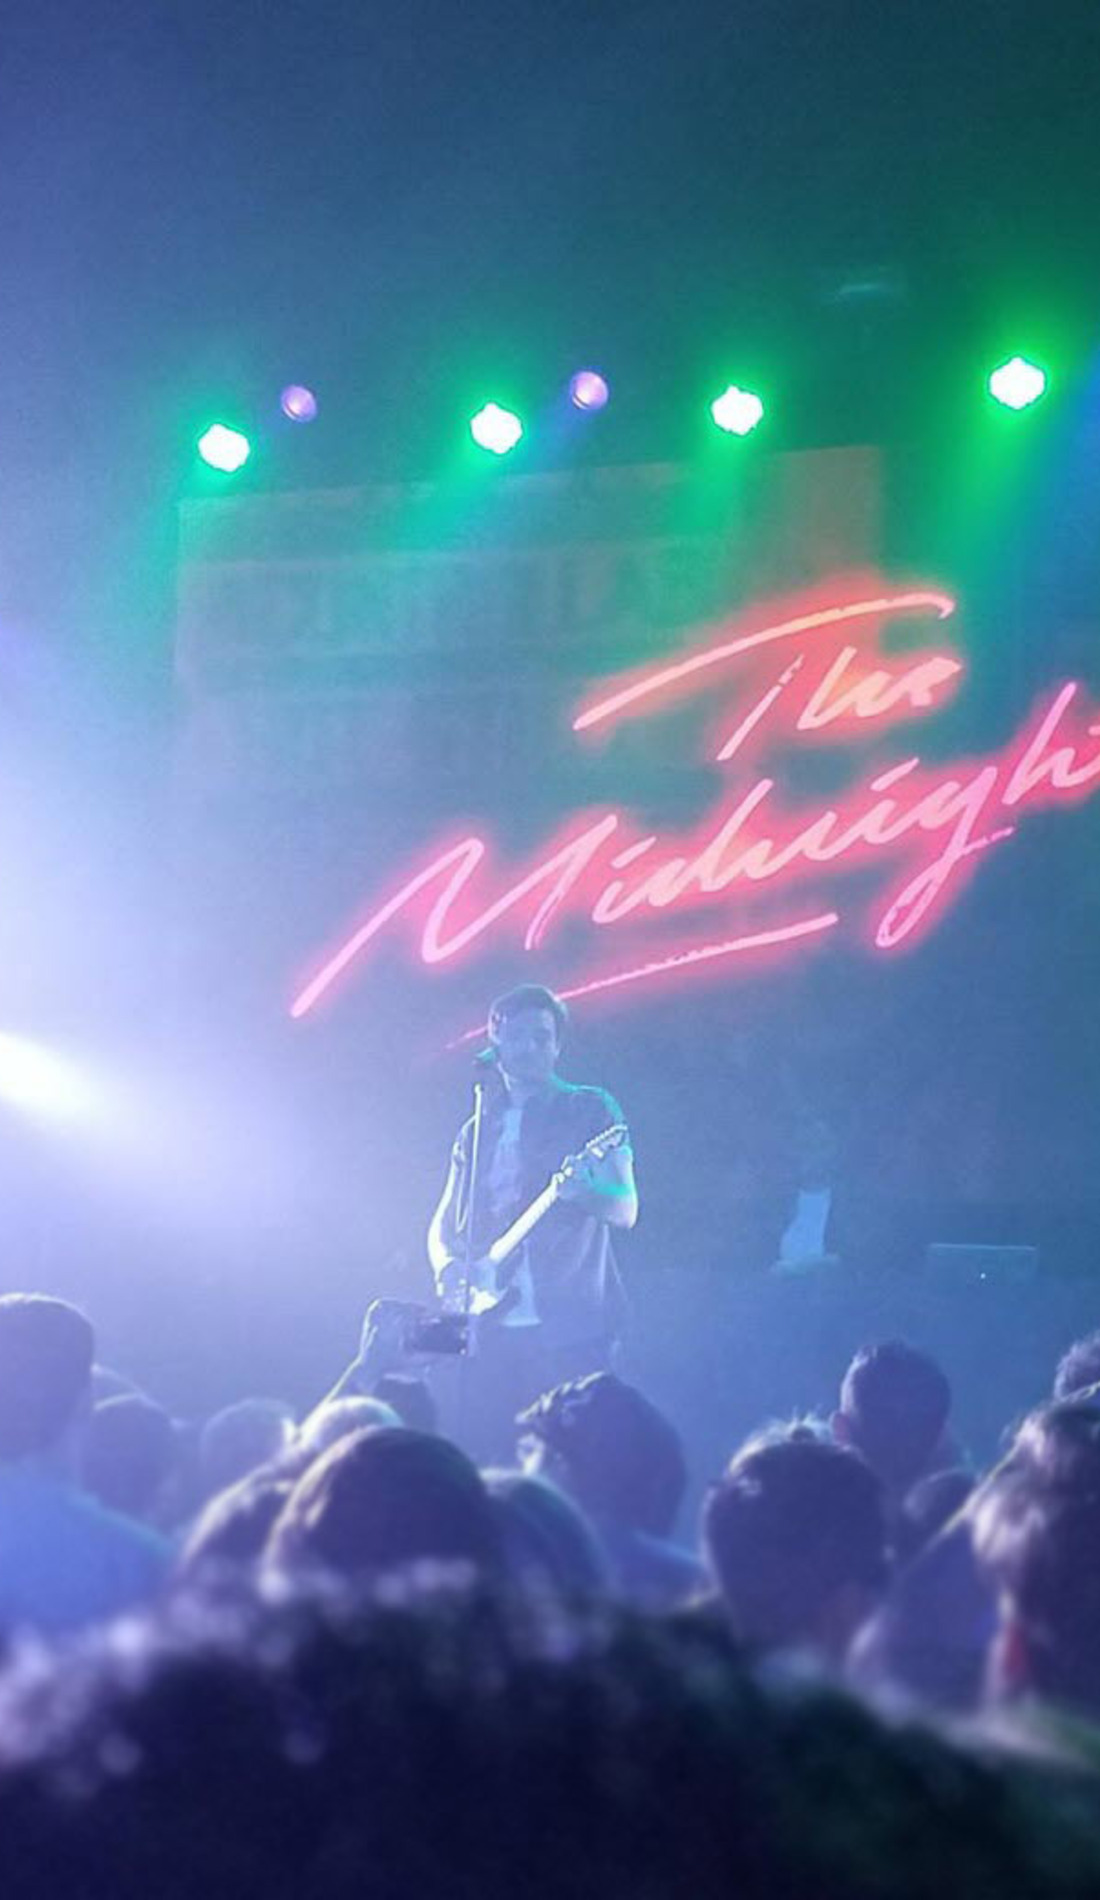 A The Midnight live event